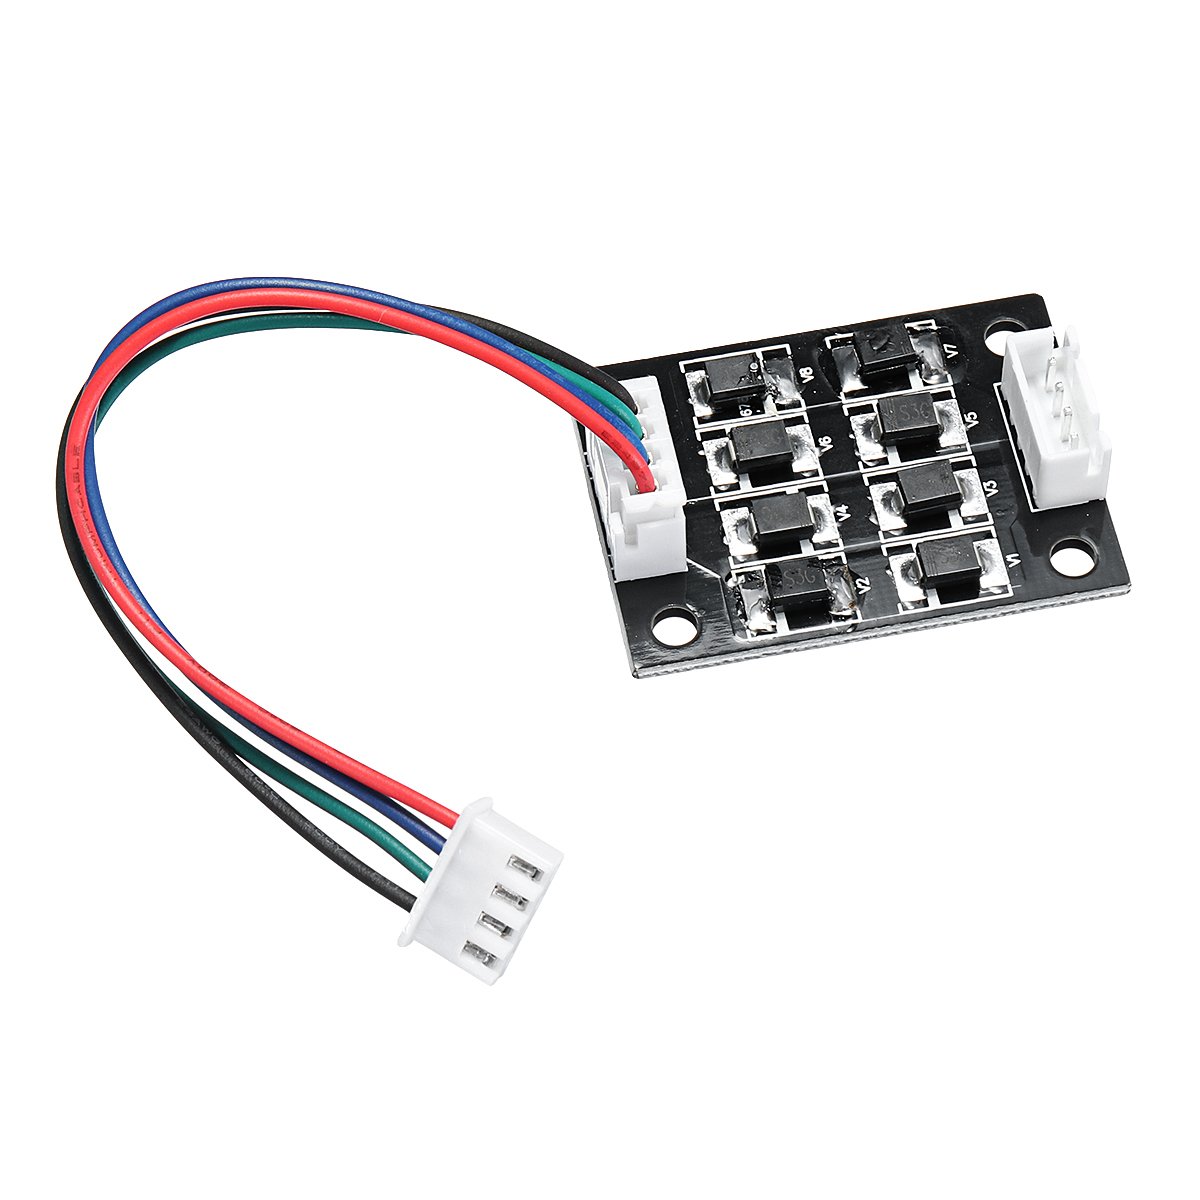 TL-Smoother Addon Module With Dupont Line For 3D Printer Stepper Motor 1